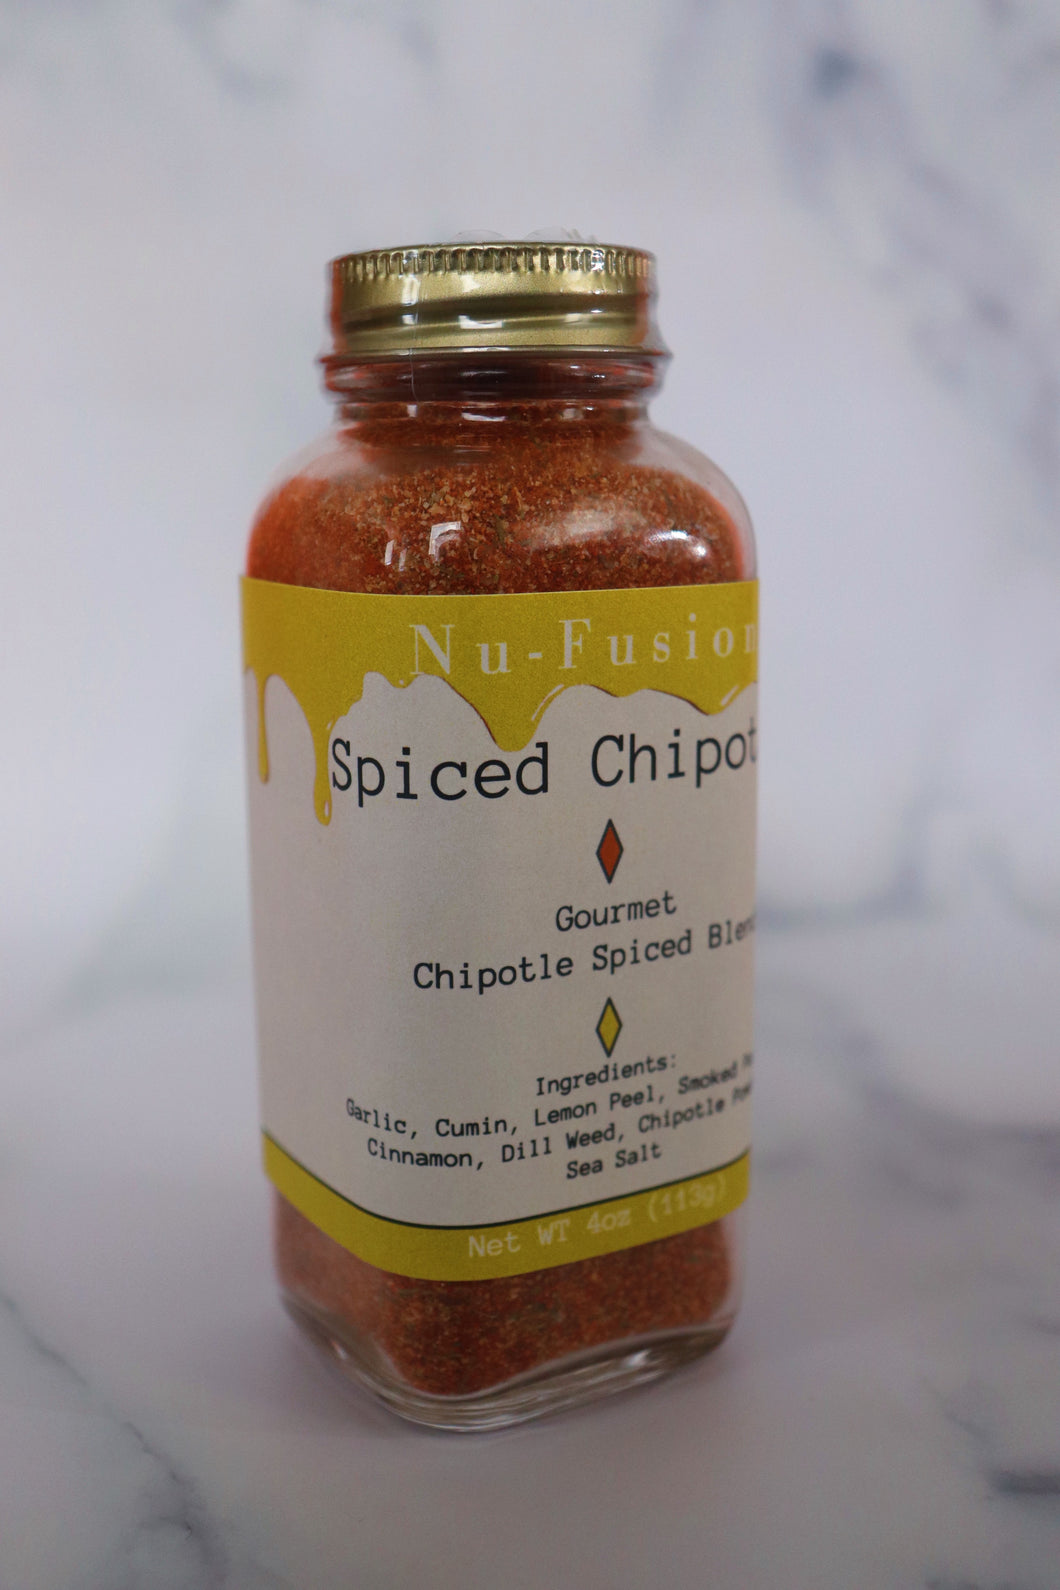 Spiced Chipotle